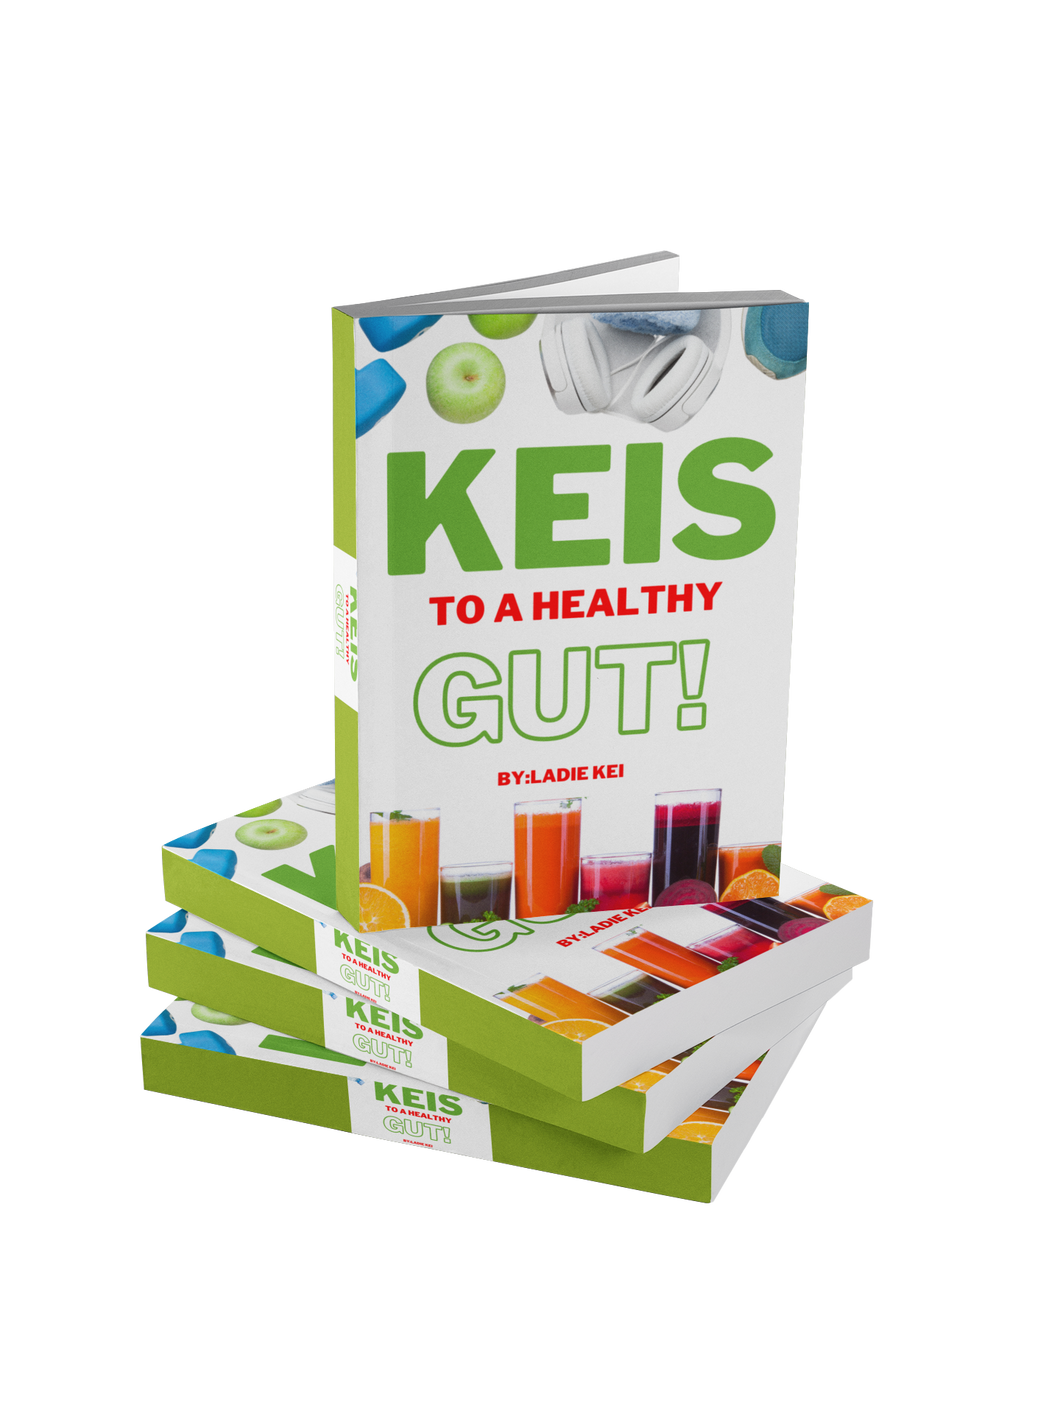 Keis to a Healthy Gut Challenge!